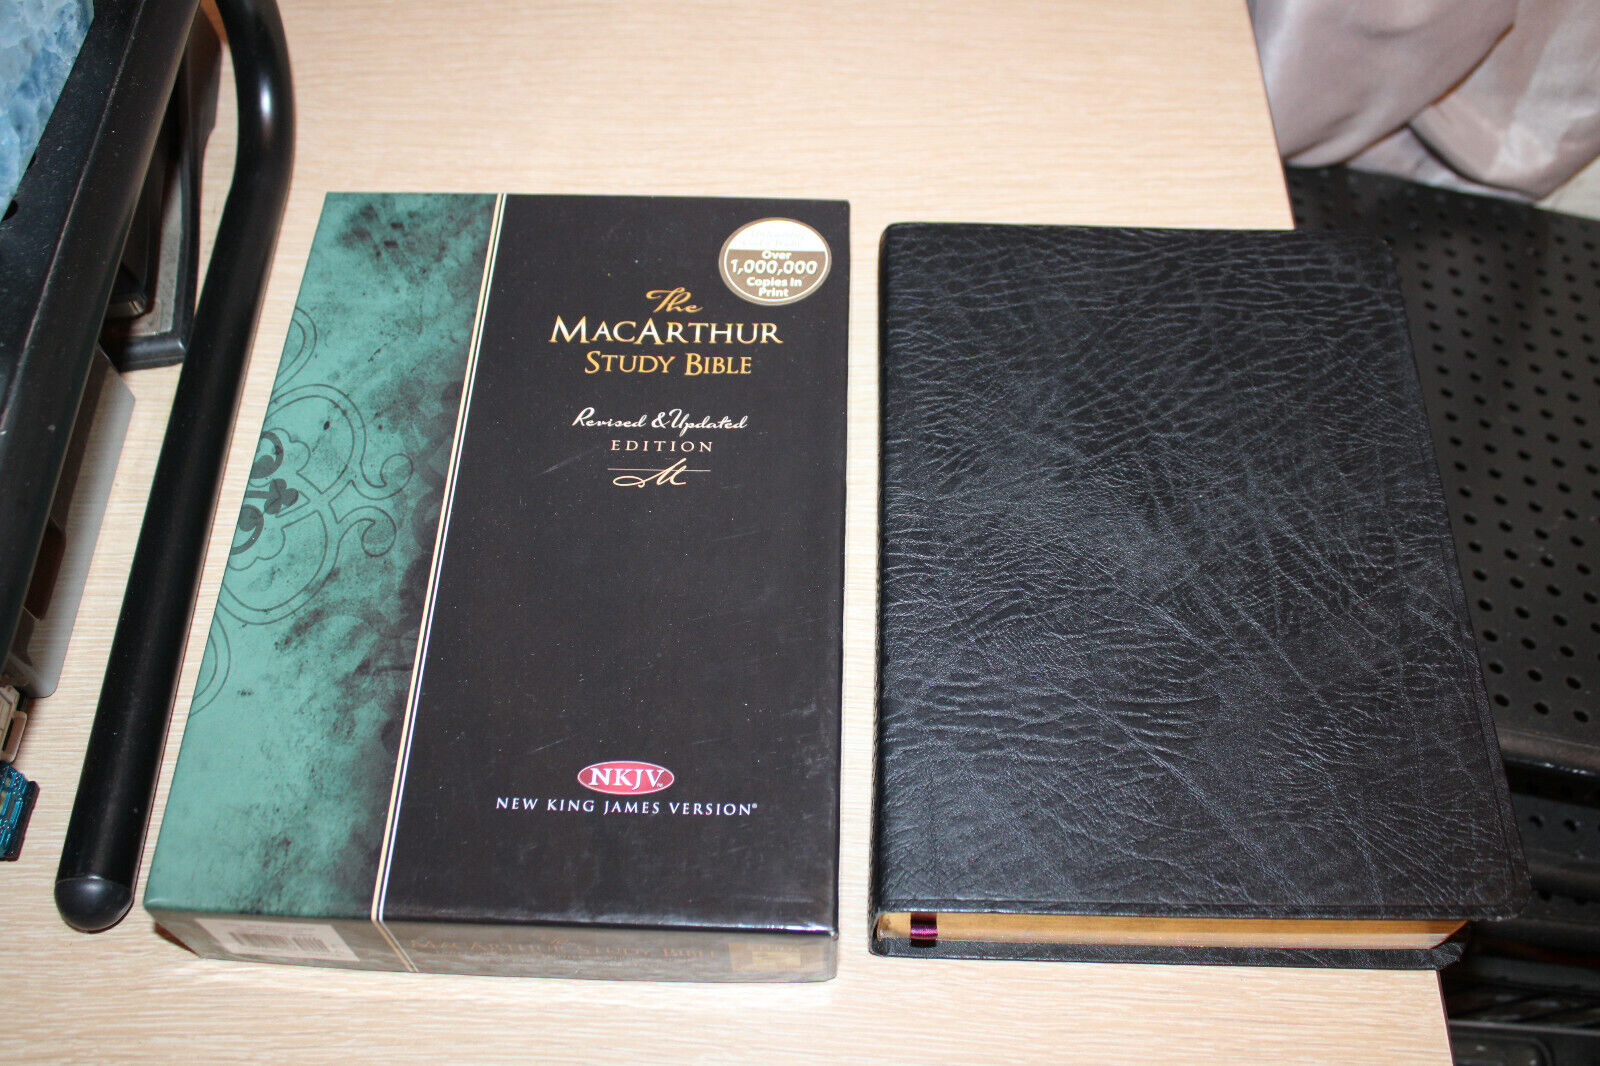 MacArthur Study Bible by John MacArthur (2006, Bonded Leather, Revised edition)